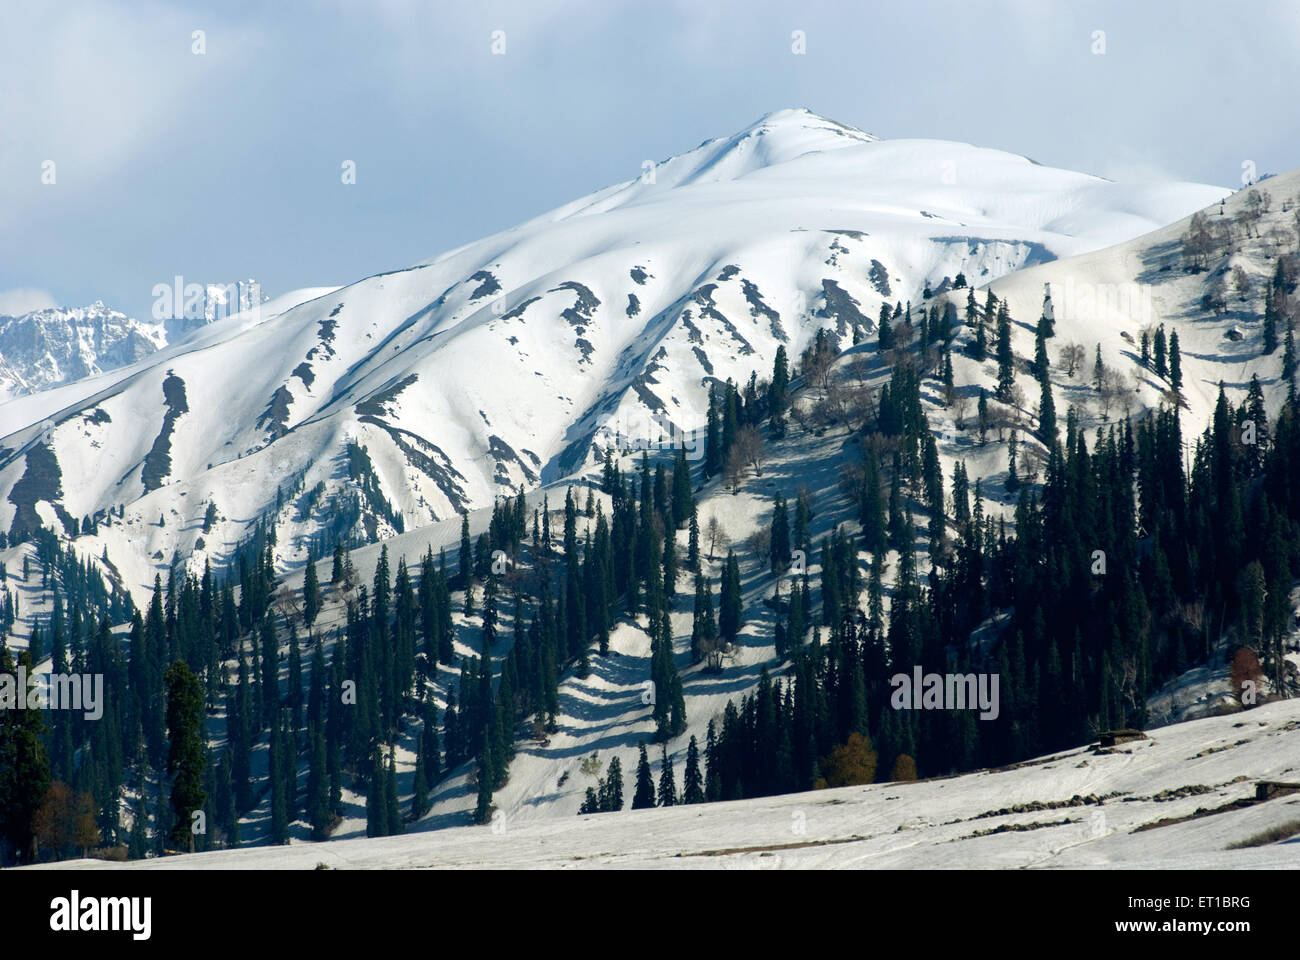 Rows of Trees in snowy ground Gulmarg Jammu and Kashmir India Asia Stock Photo